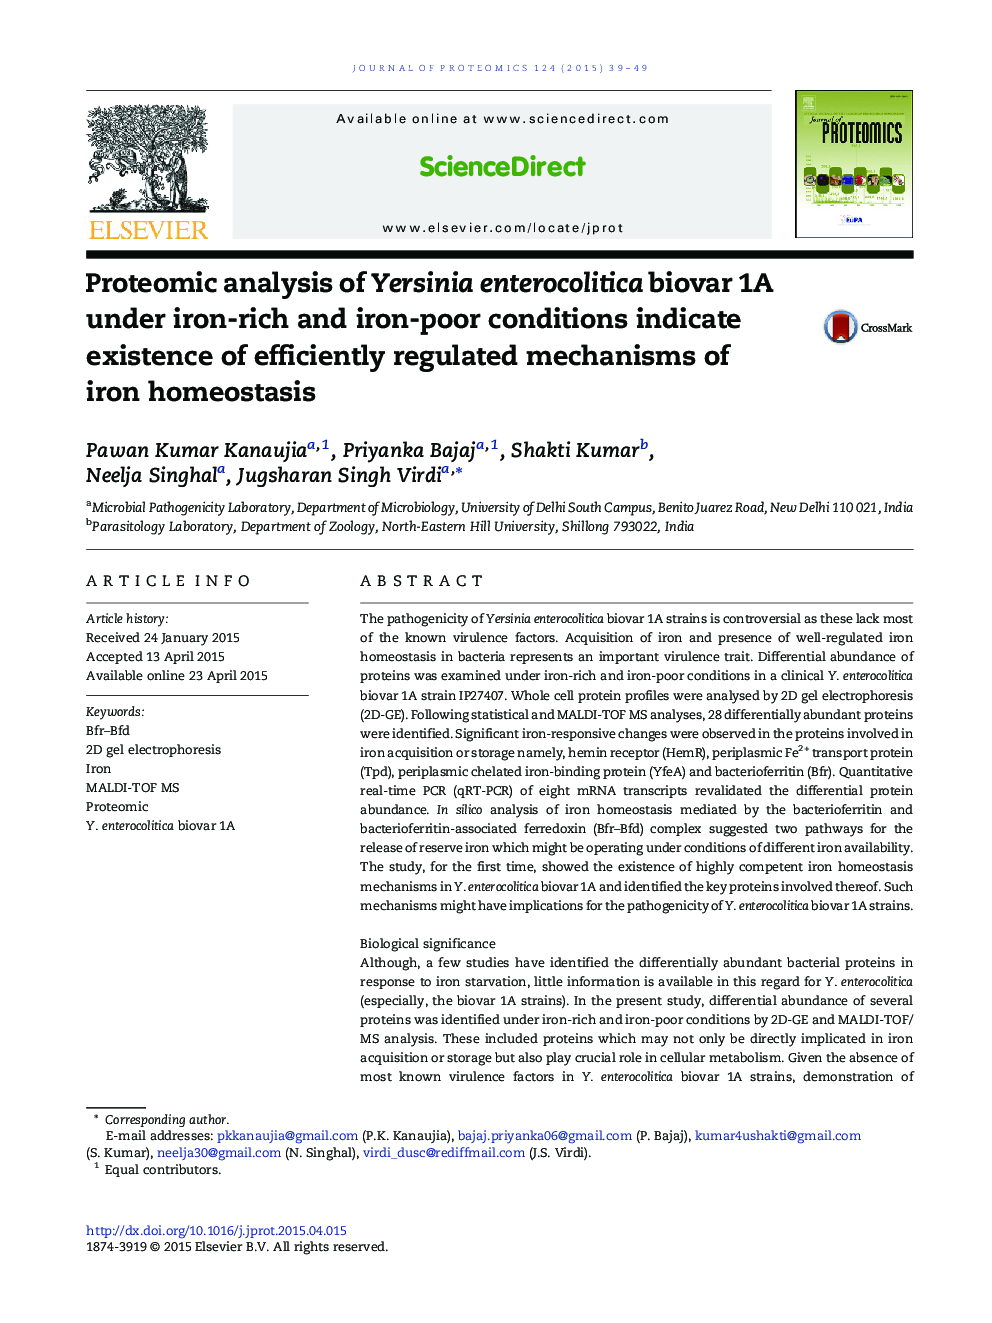 Proteomic analysis of Yersinia enterocolitica biovar 1A under iron-rich and iron-poor conditions indicate existence of efficiently regulated mechanisms of iron homeostasis